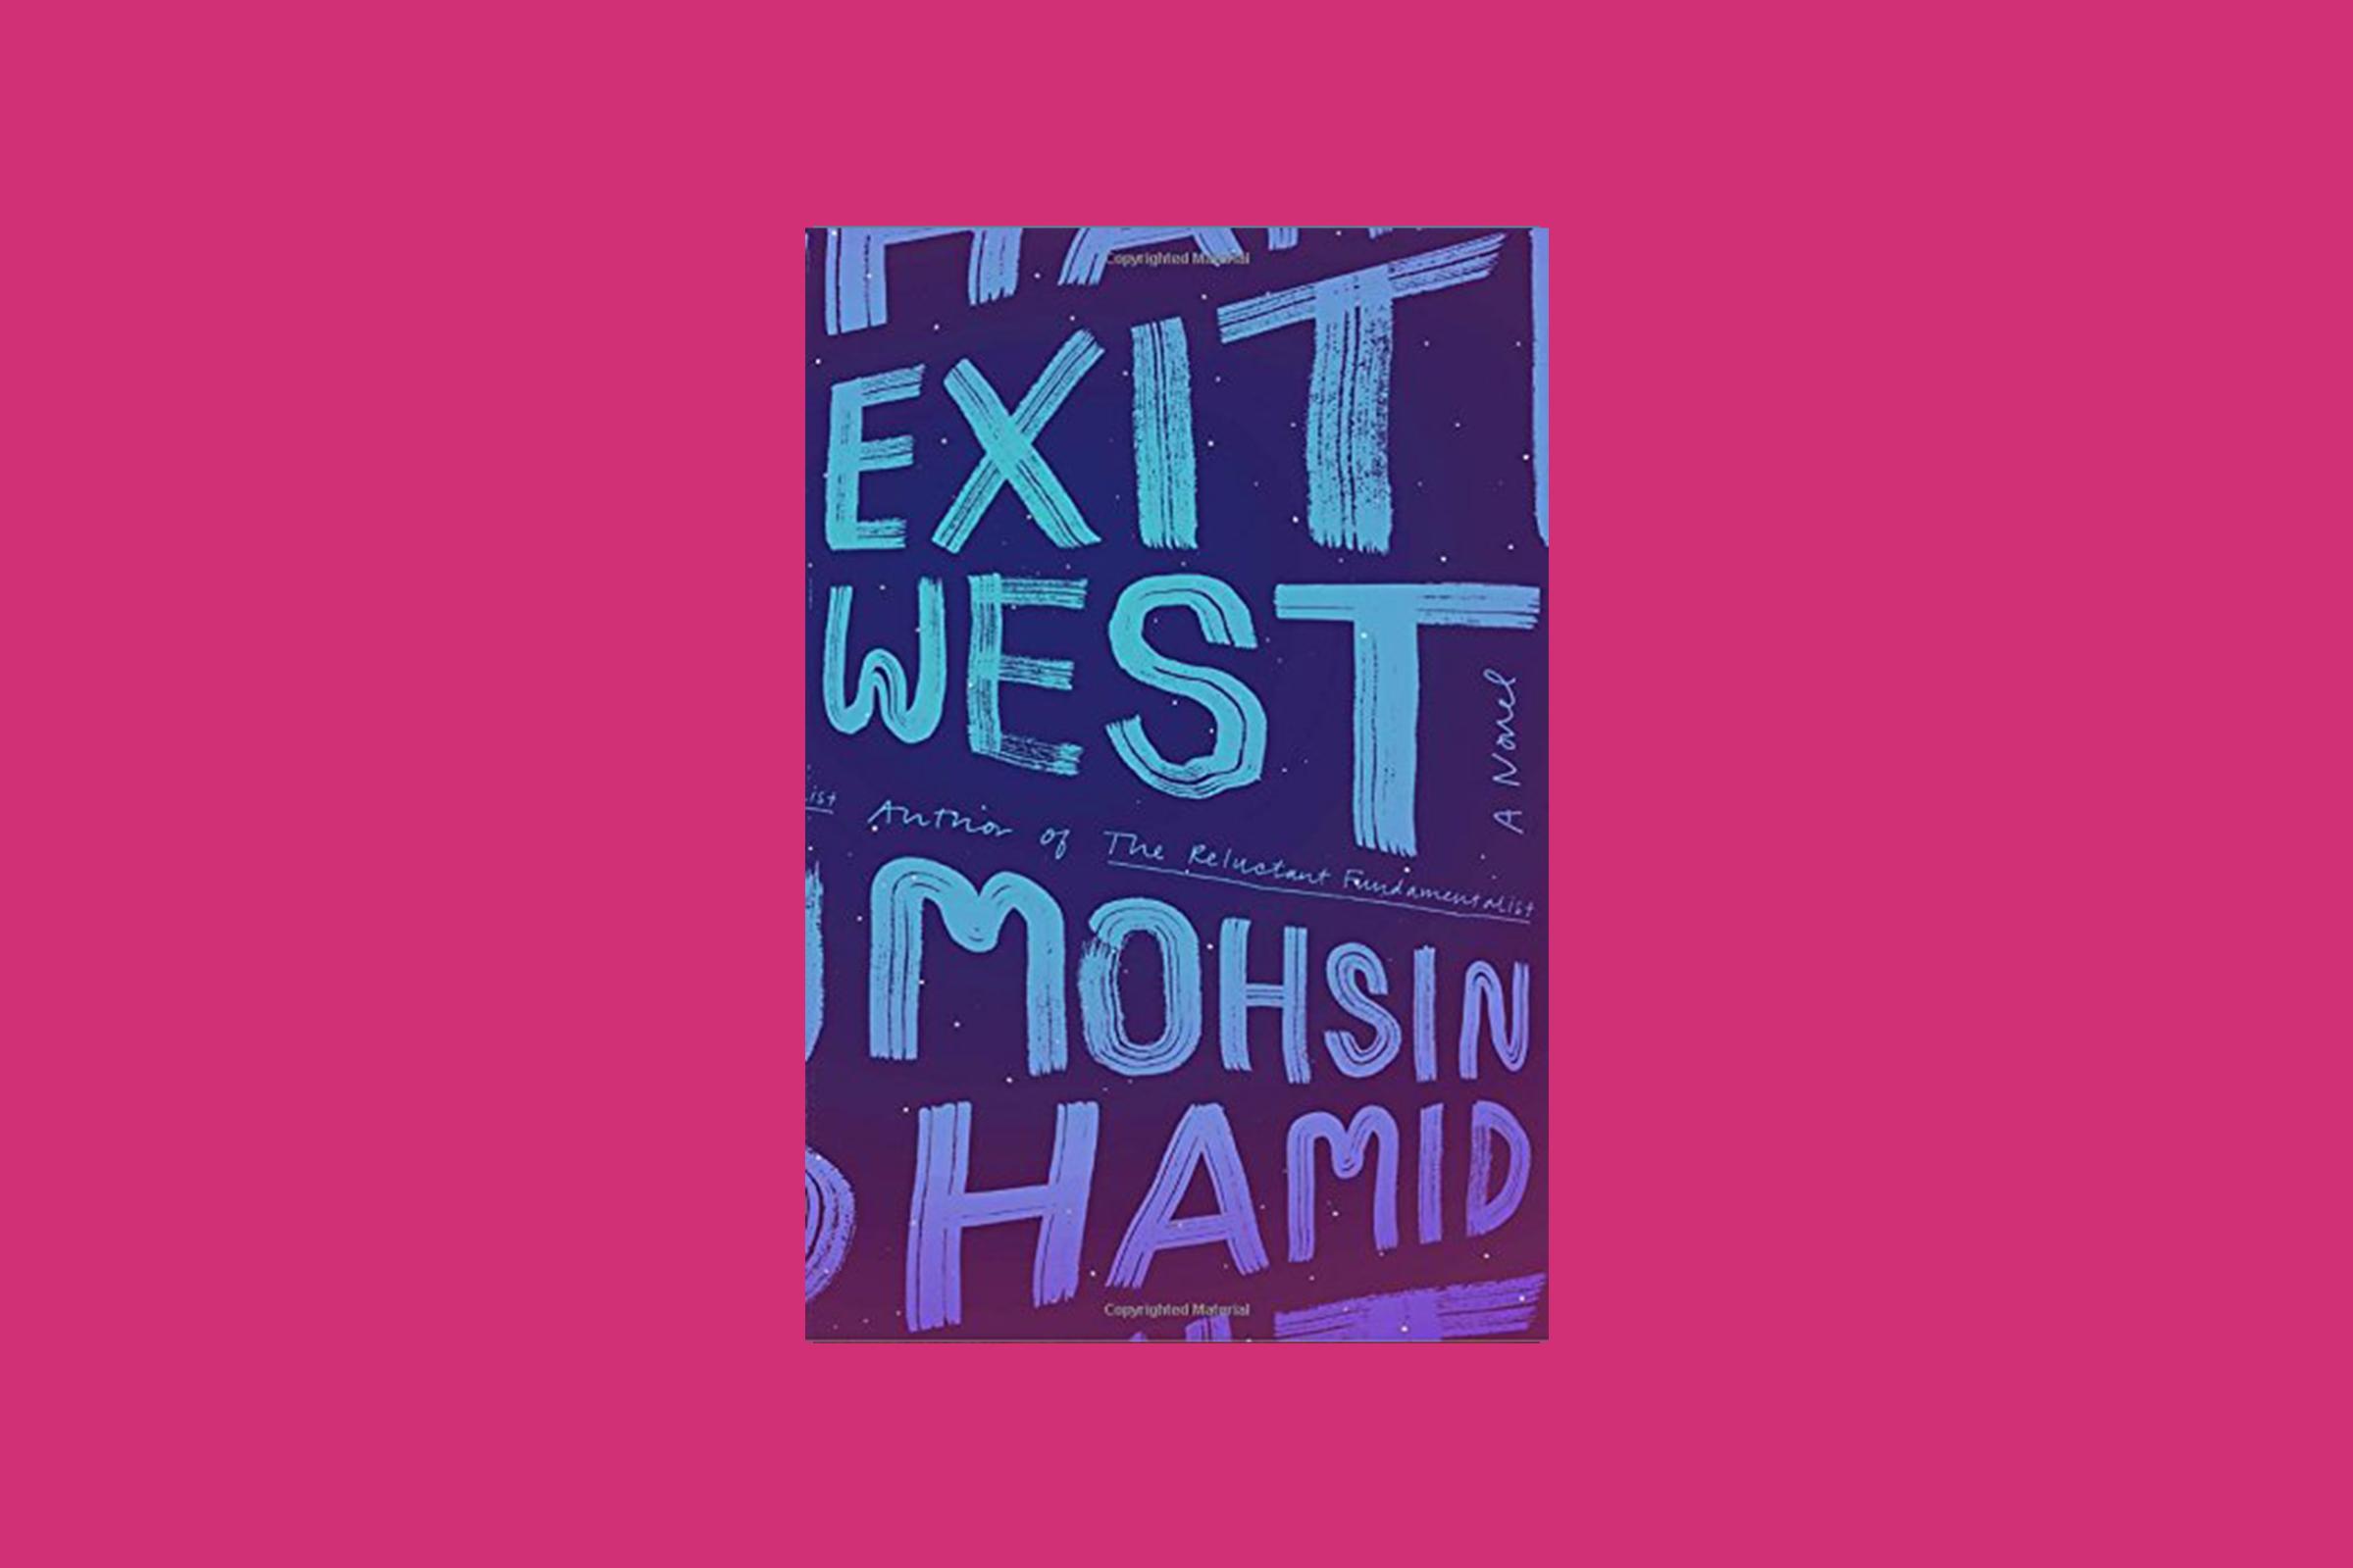 Exit West is one of the top 10 novels of 2017